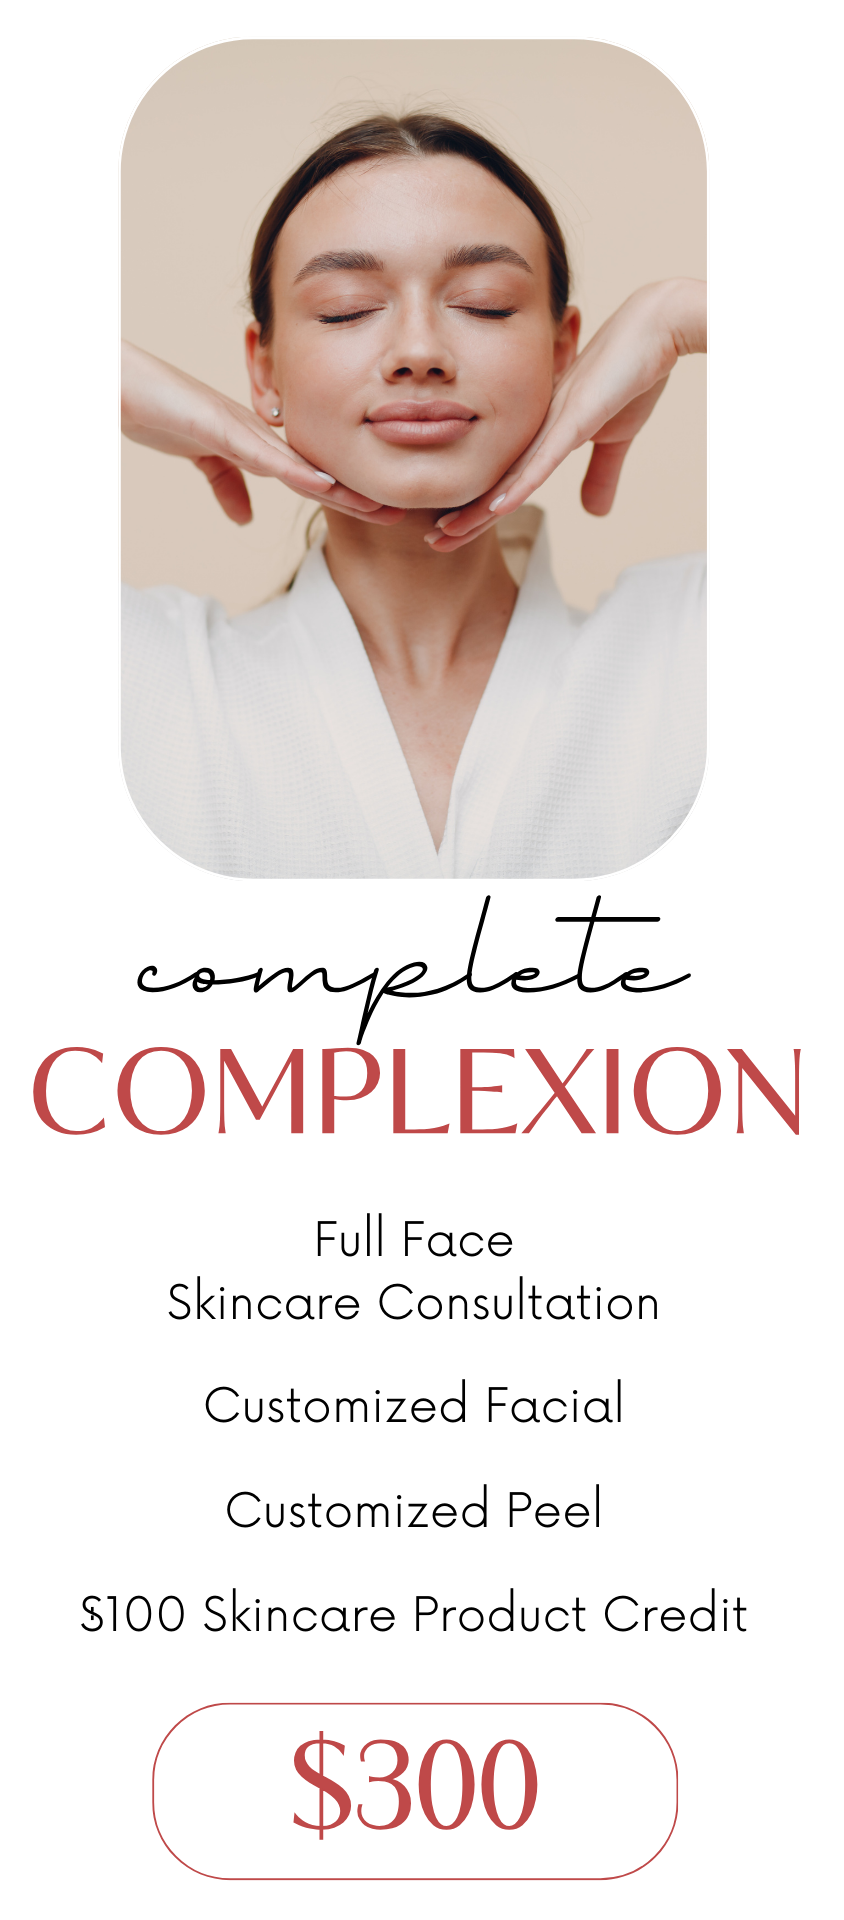 Complete Complexion V-Day Package Details